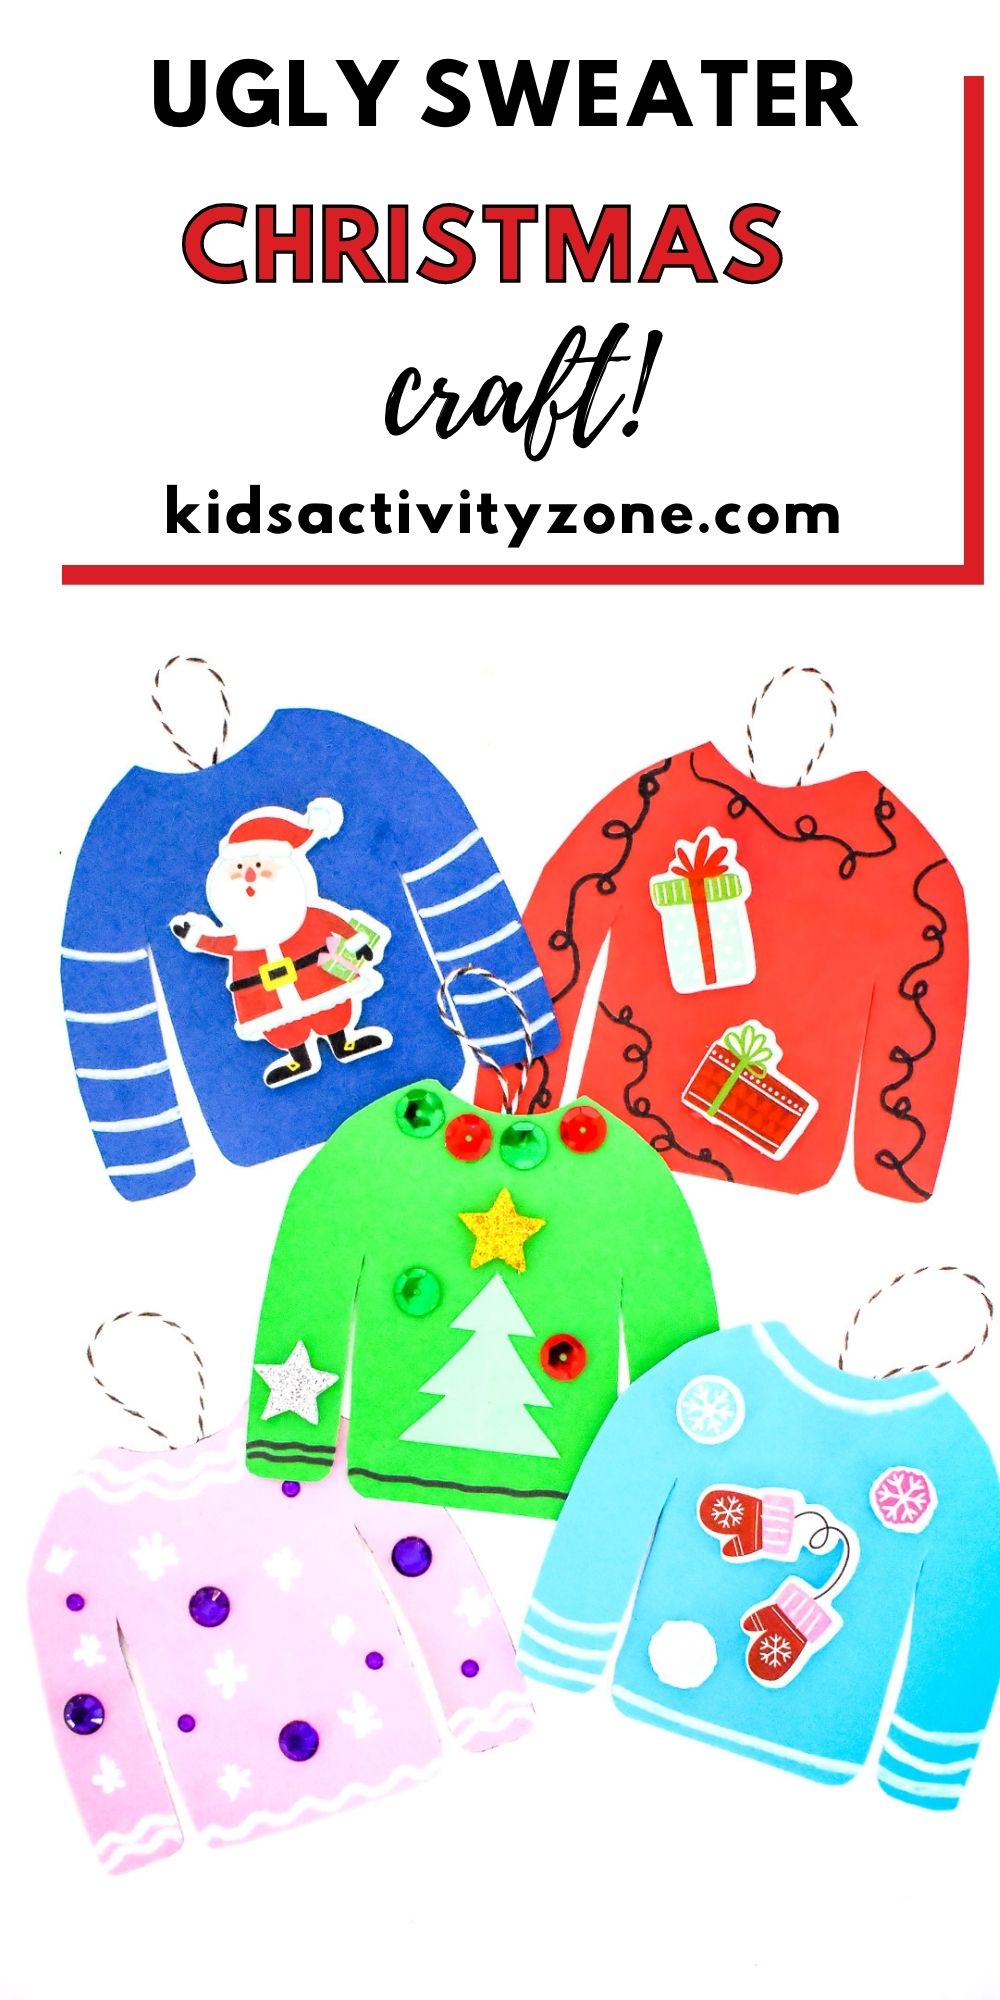 Ugly Sweater Craft is a fun and easy craft for holiday parties. Cut the sweaters out of the template provided then decorate! Simple, cheap and festive. You can even make them into keepsake ornaments!